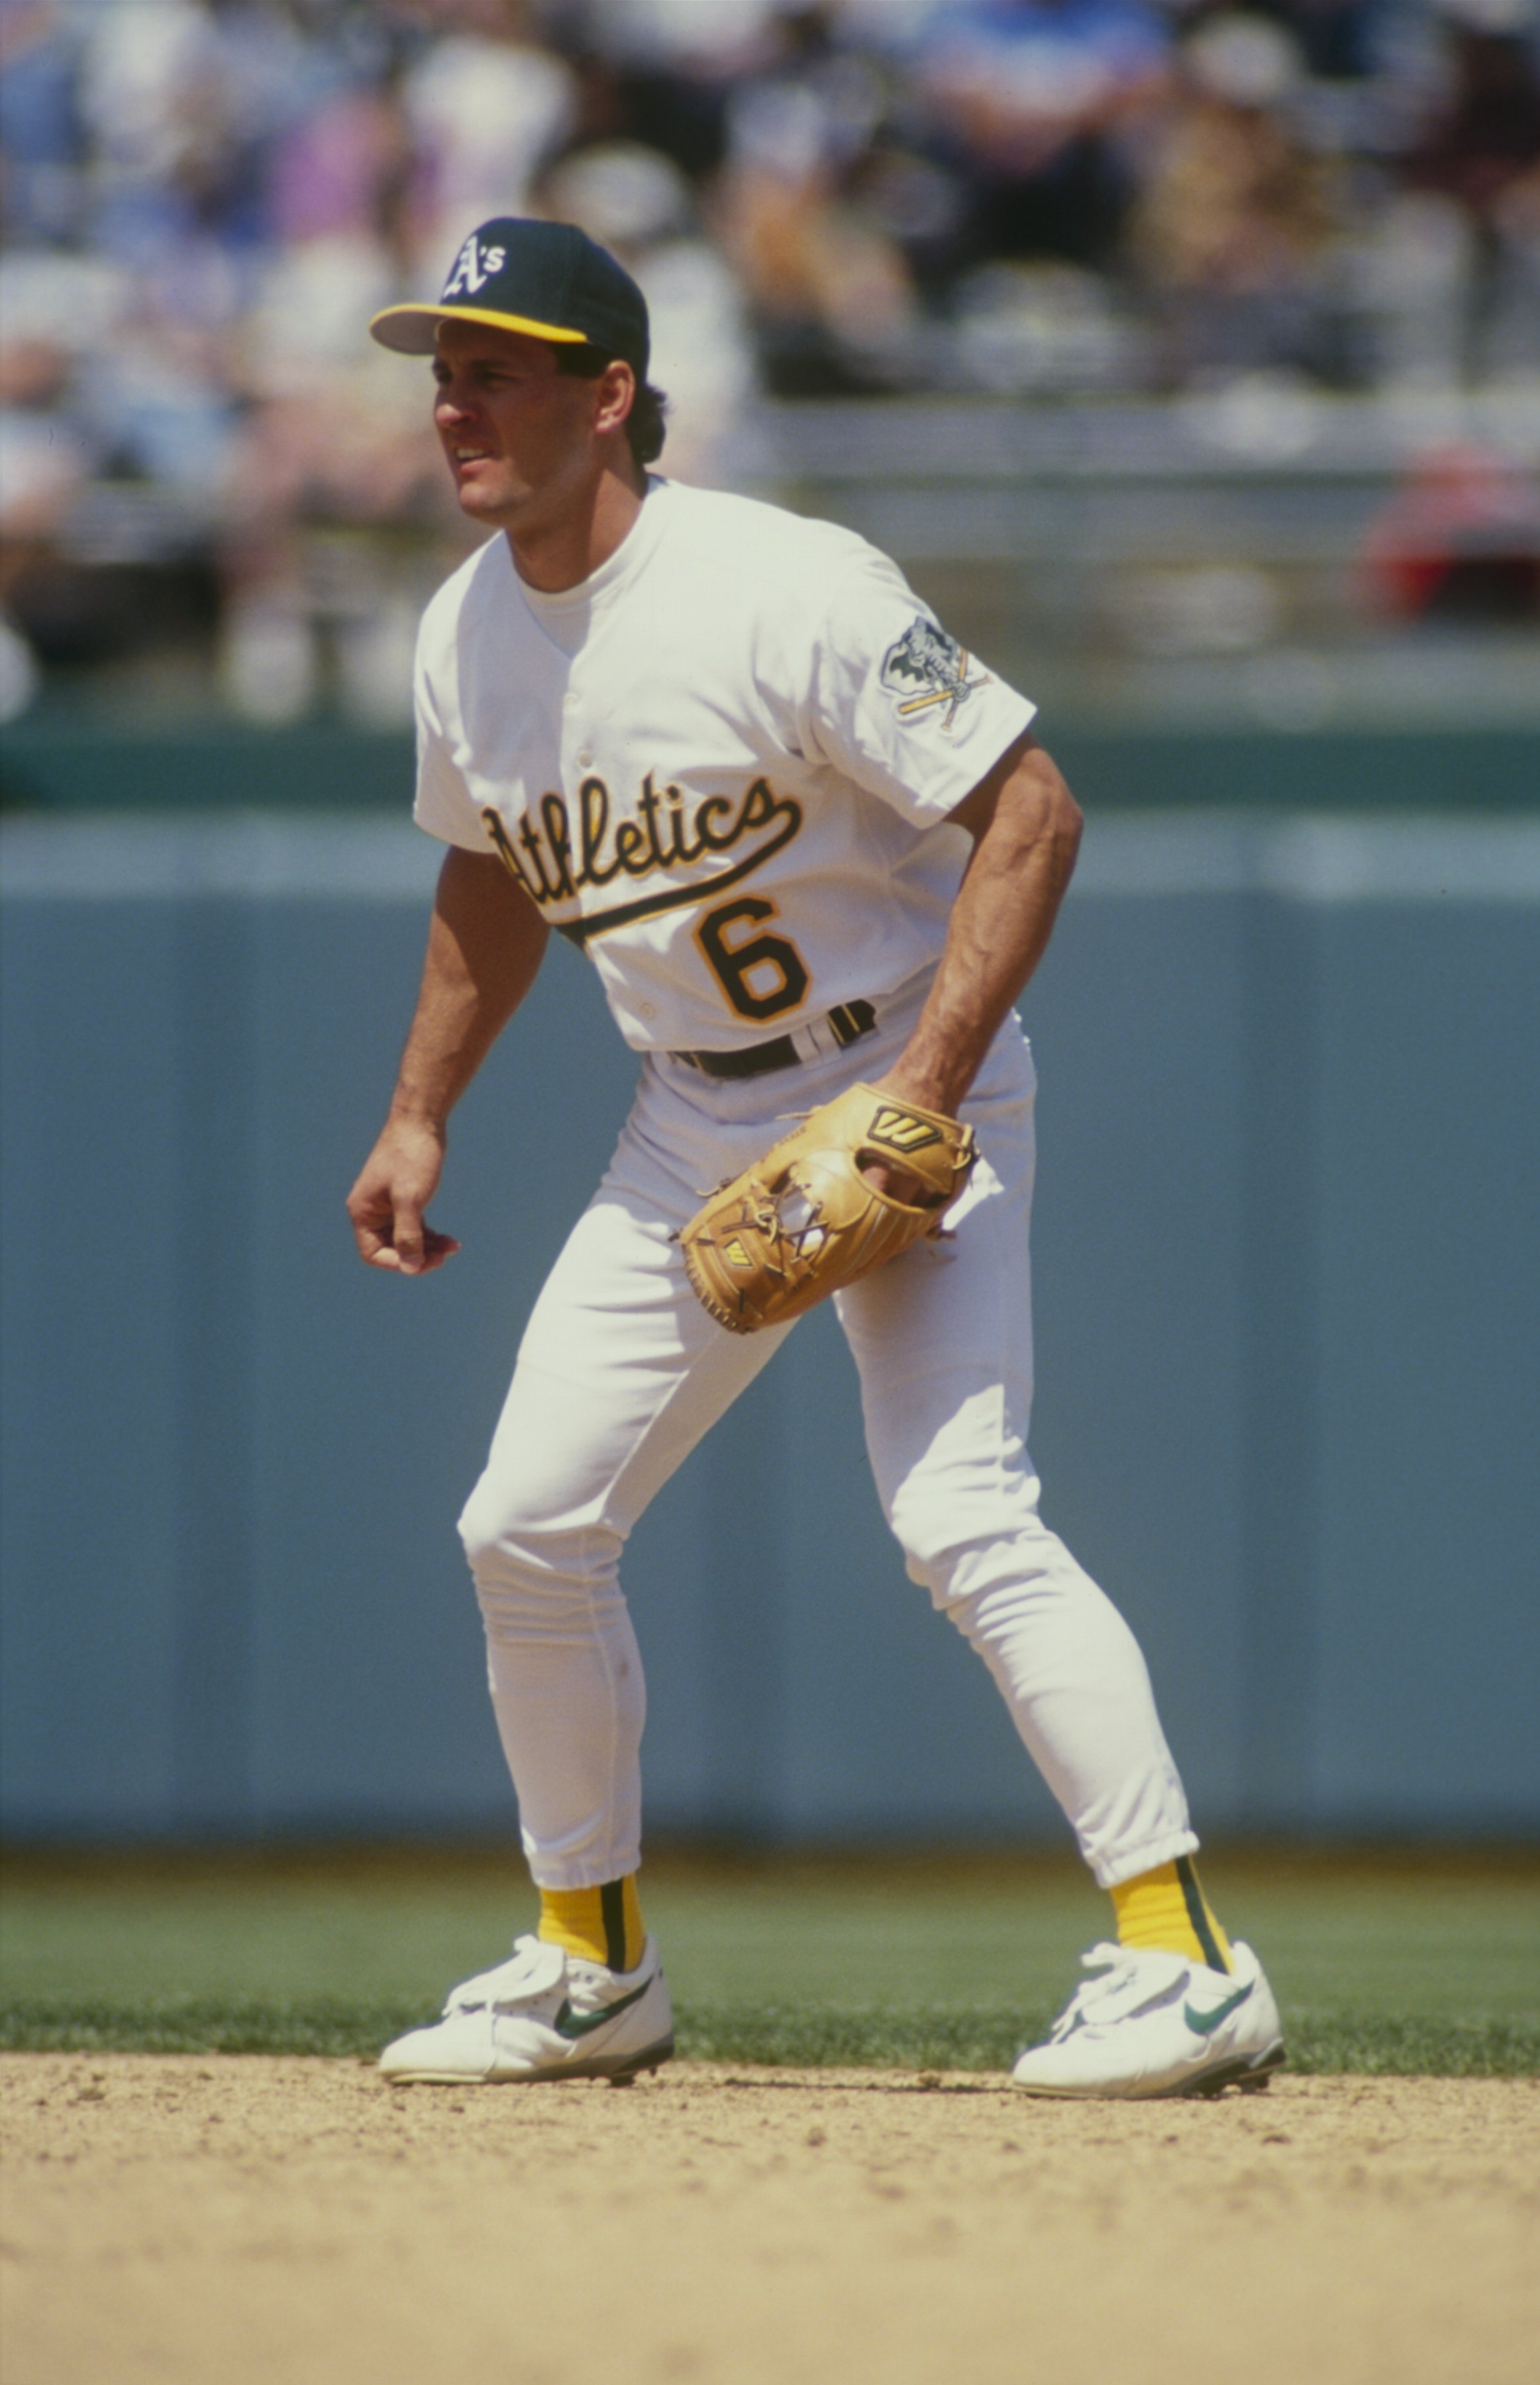 OAKLAND,CA - APRIL 30: Steve Sax #6 of the Oakland Athletics gets ready infield during a game against the New York Yankees at Oakland-Alameda County Coliseum on April 30,1994 in Oakland,California. (Photo by: Otto Greule Jr/Getty Images)